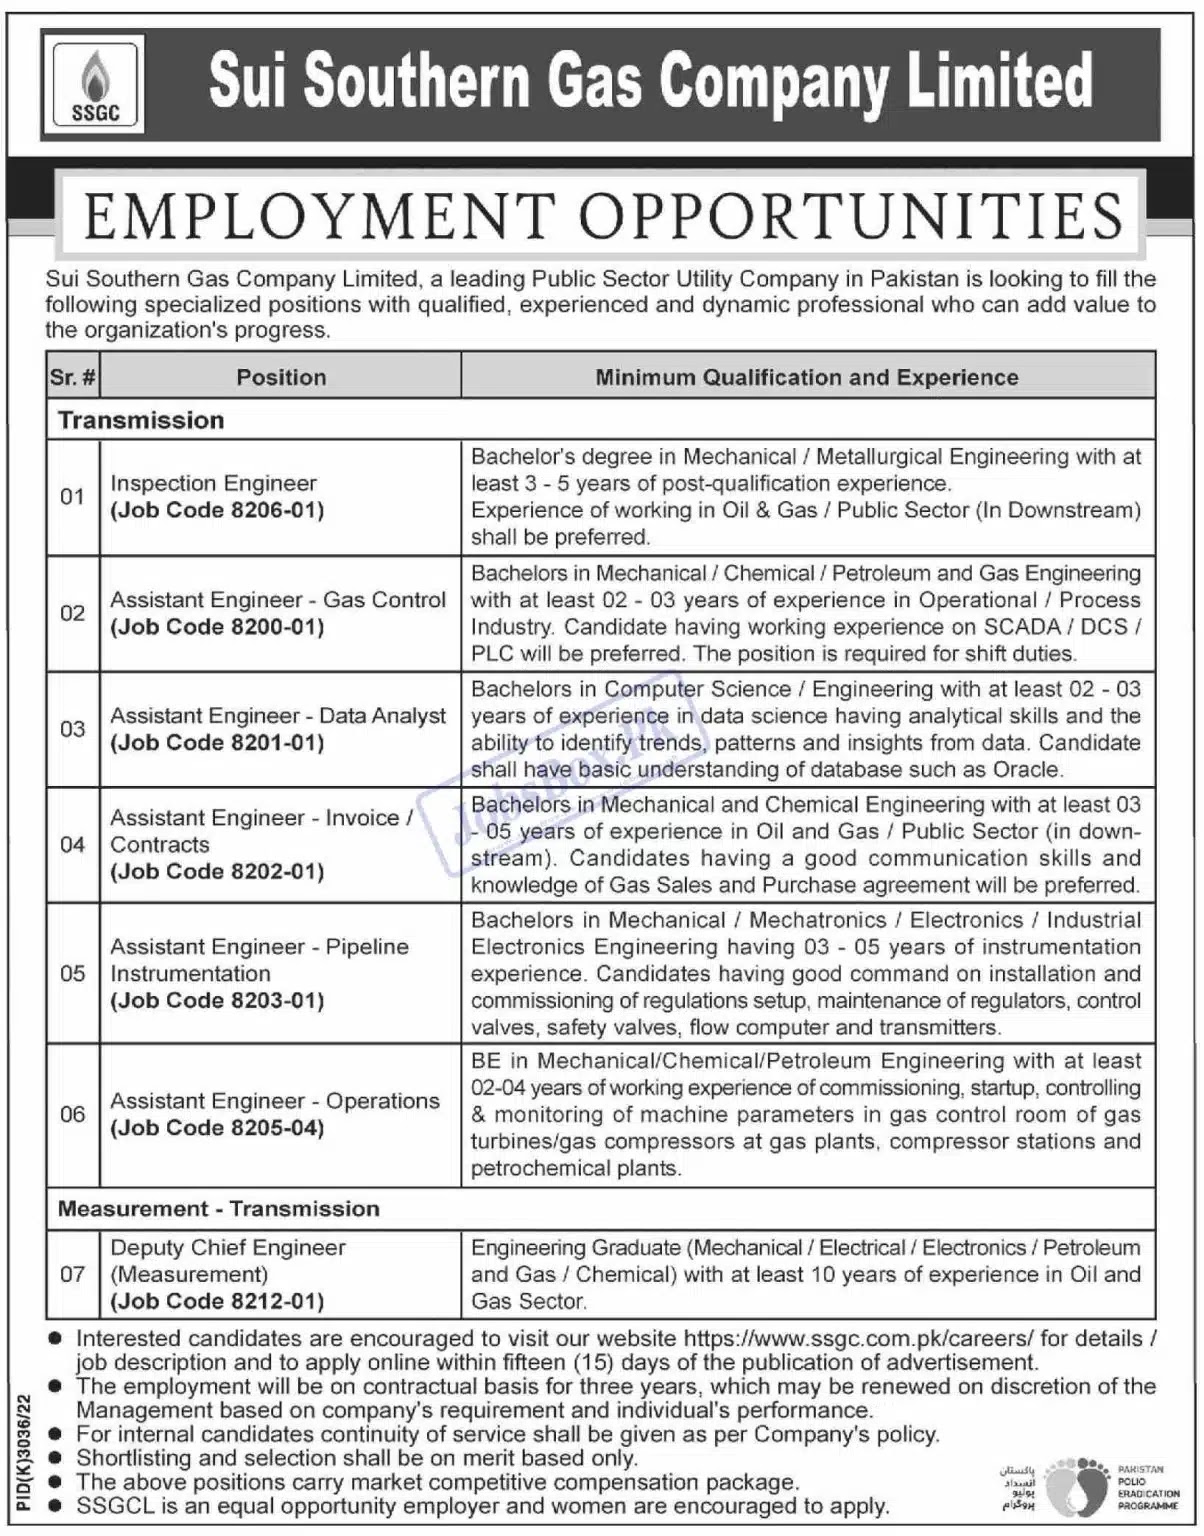 SSGC Sui Southern Gas Company jobs in 2023